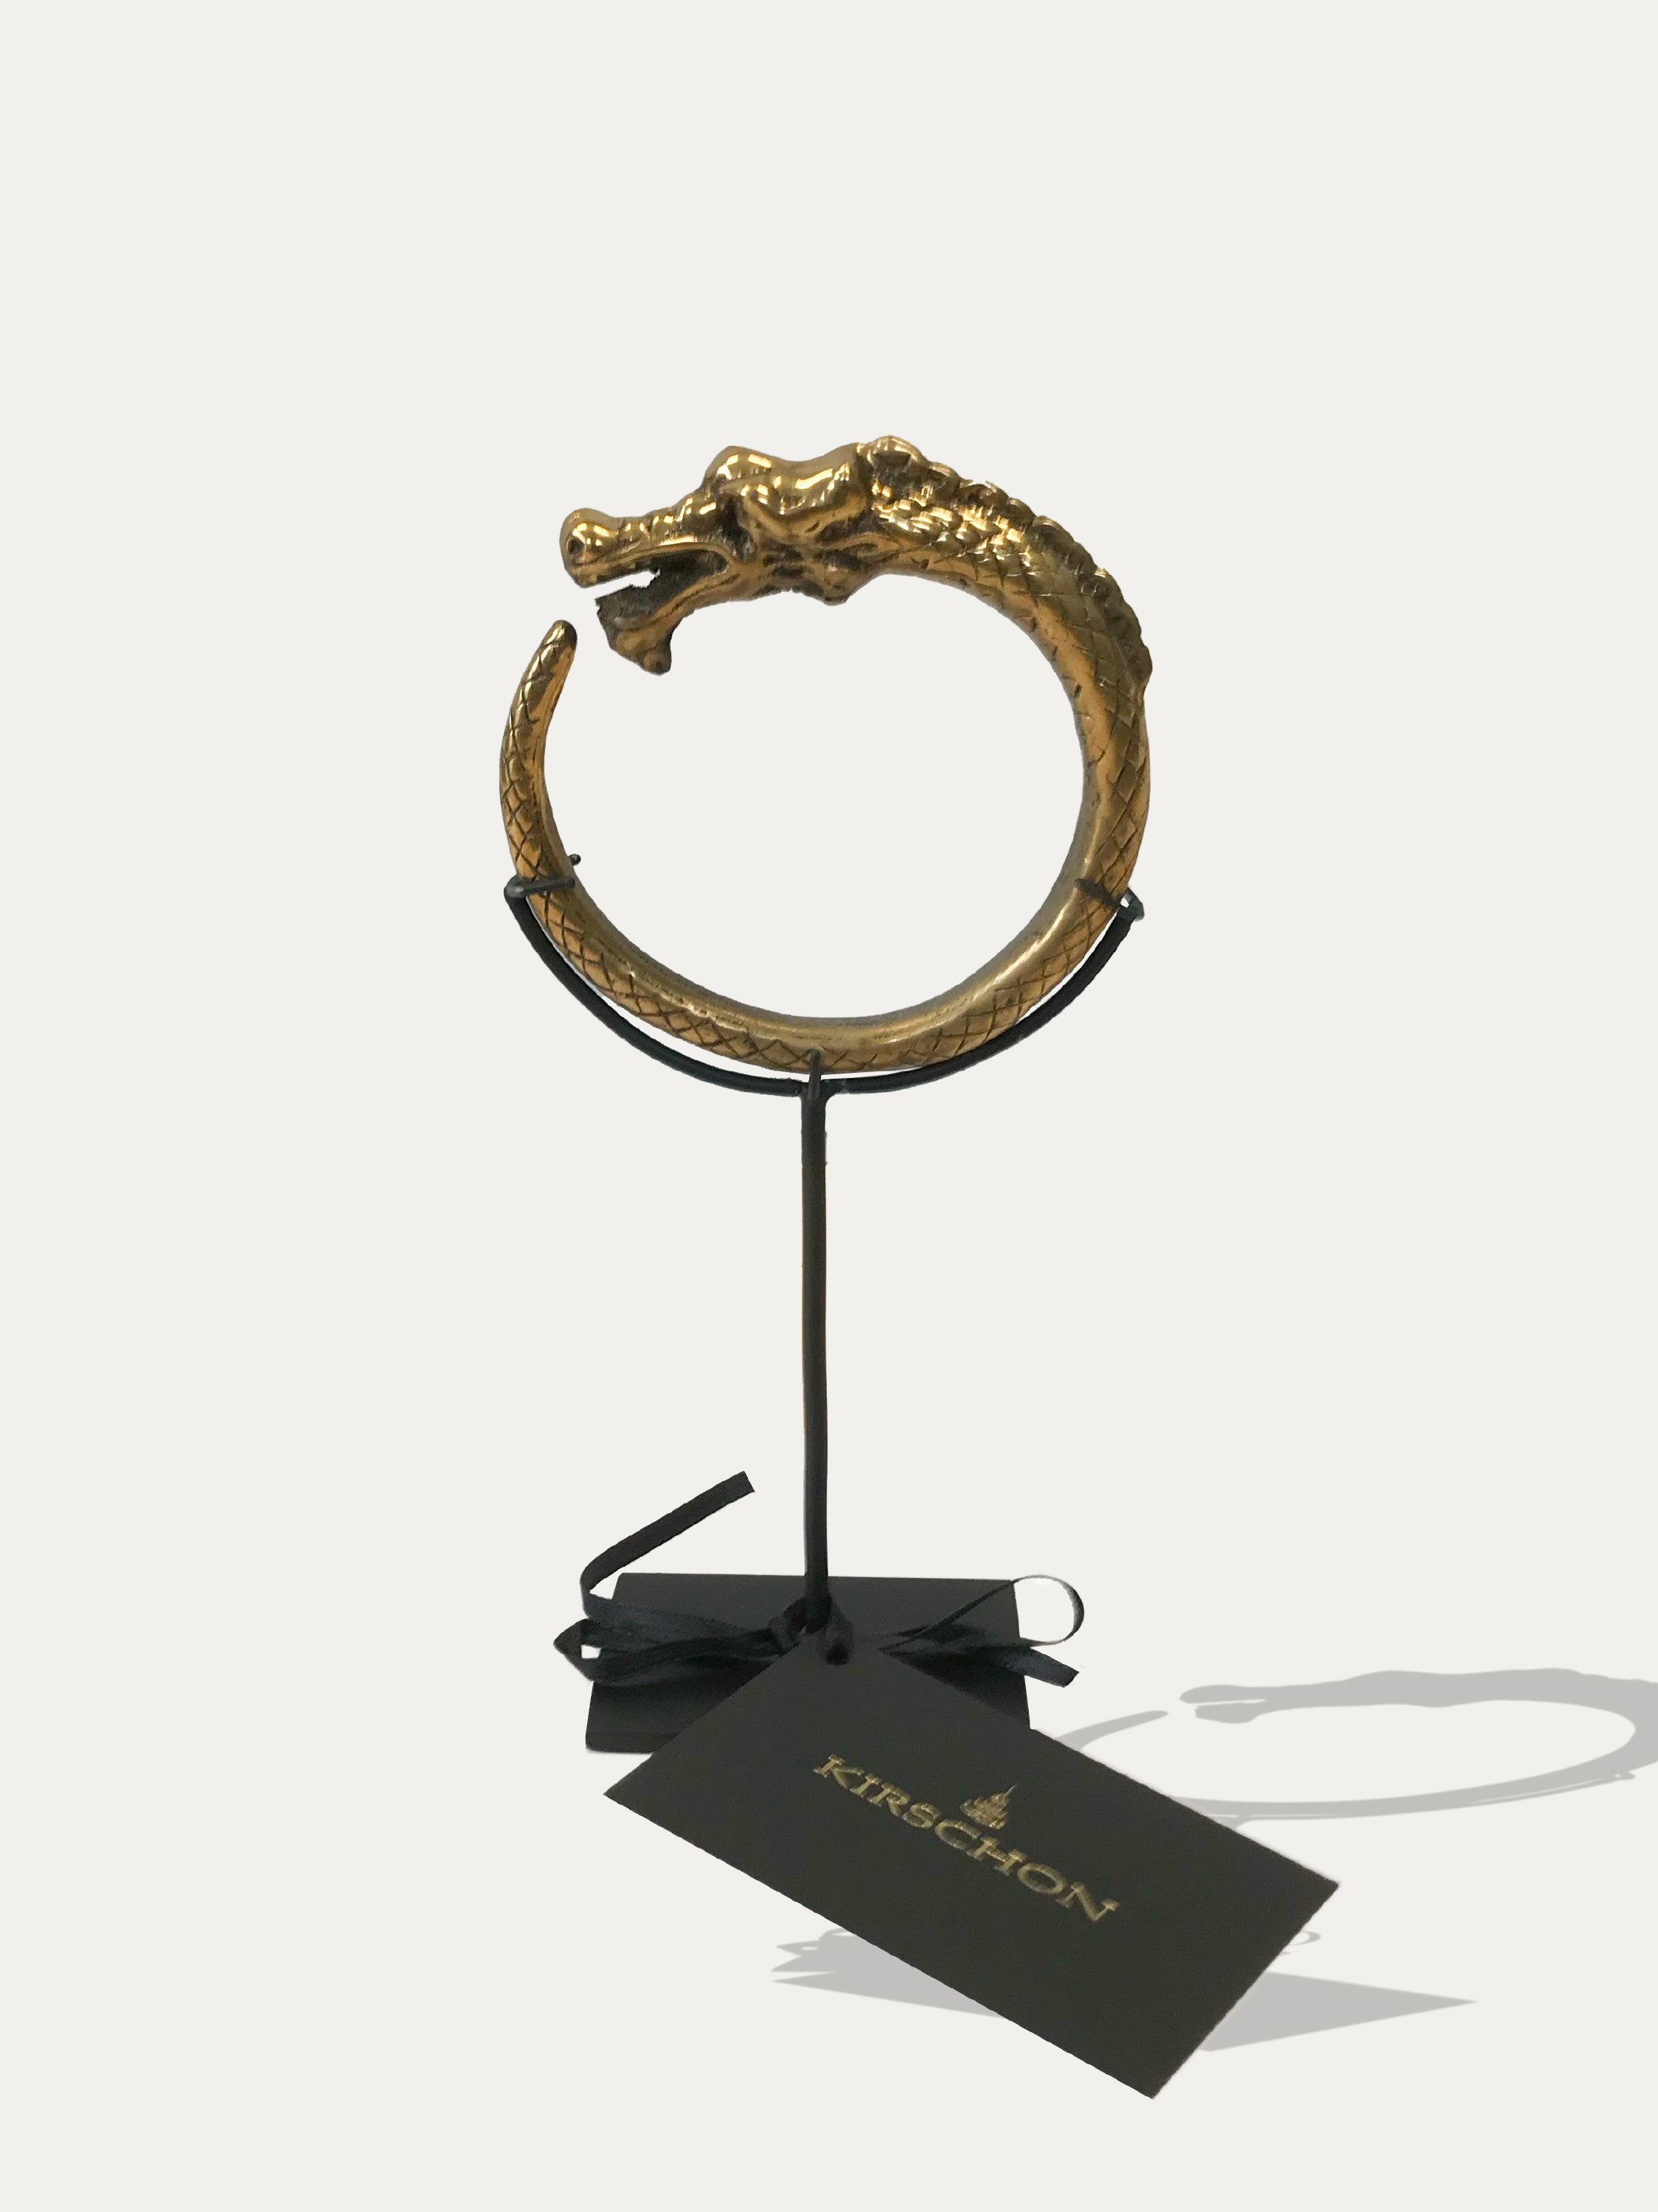 Dragon bangle from Borneo - Asian Art from Kirschon